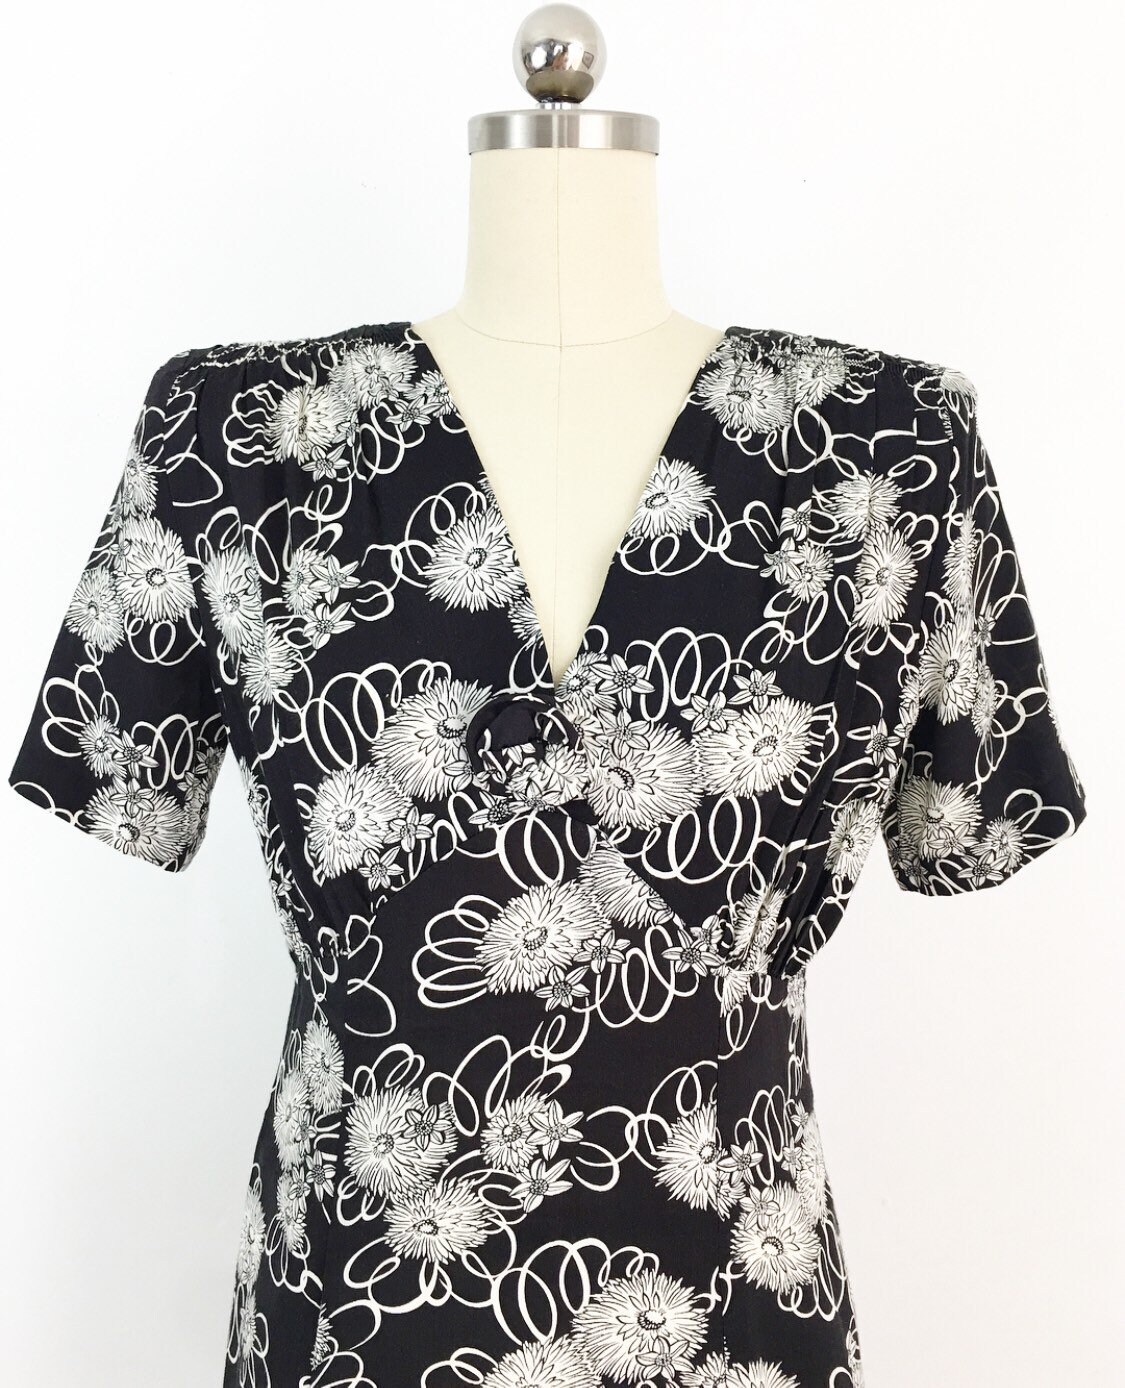 70s Les Fleurs Dress Black and White Floral Abstract | Etsy